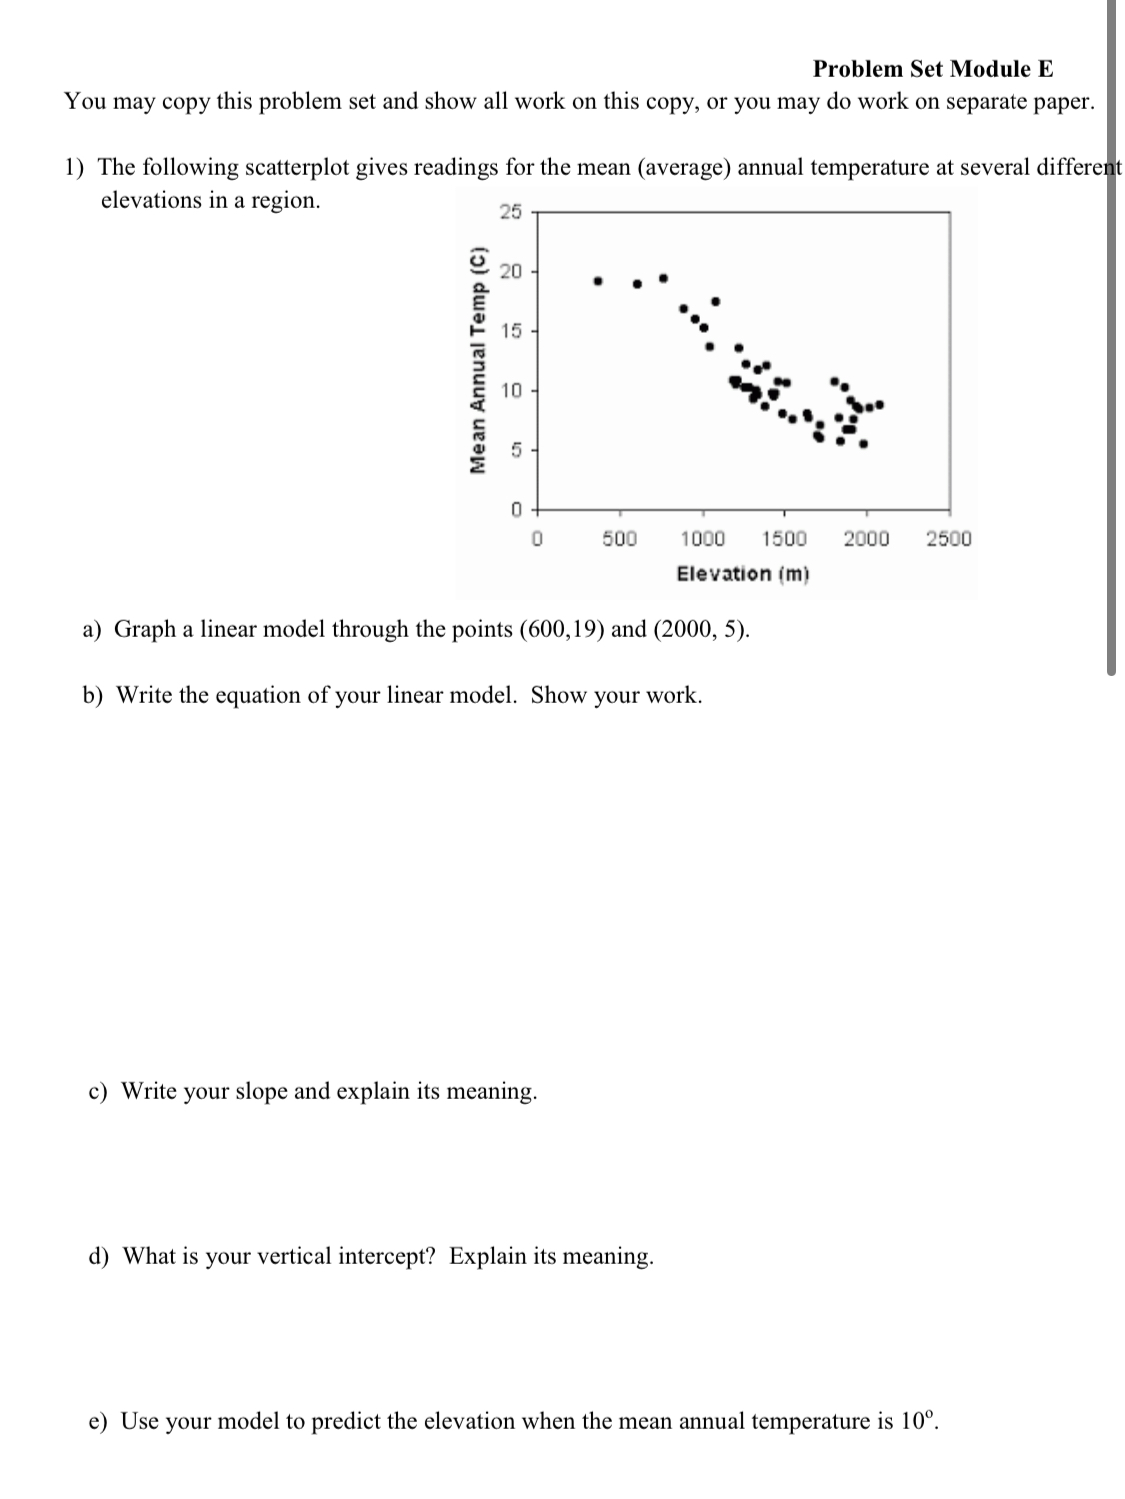 Problem Set Module E
You may copy this problem set and show all work on this copy, or you may do work on separate paper.
1) The following scatterplot gives readings for the mean (average) annual temperature at several different
elevations in a region.
25
20
15.
10
500
1000
1500
2000
2500
Elevation (m)
a) Graph a linear model through the points (600,19) and (2000, 5).
b) Write the equation of your linear model. Show your work.
c) Write your slope and explain its meaning.
d) What is your vertical intercept? Explain its meaning.
e) Use your model to predict the elevation when the mean annual temperature is 10°.
Mean Annual Temp (C)
